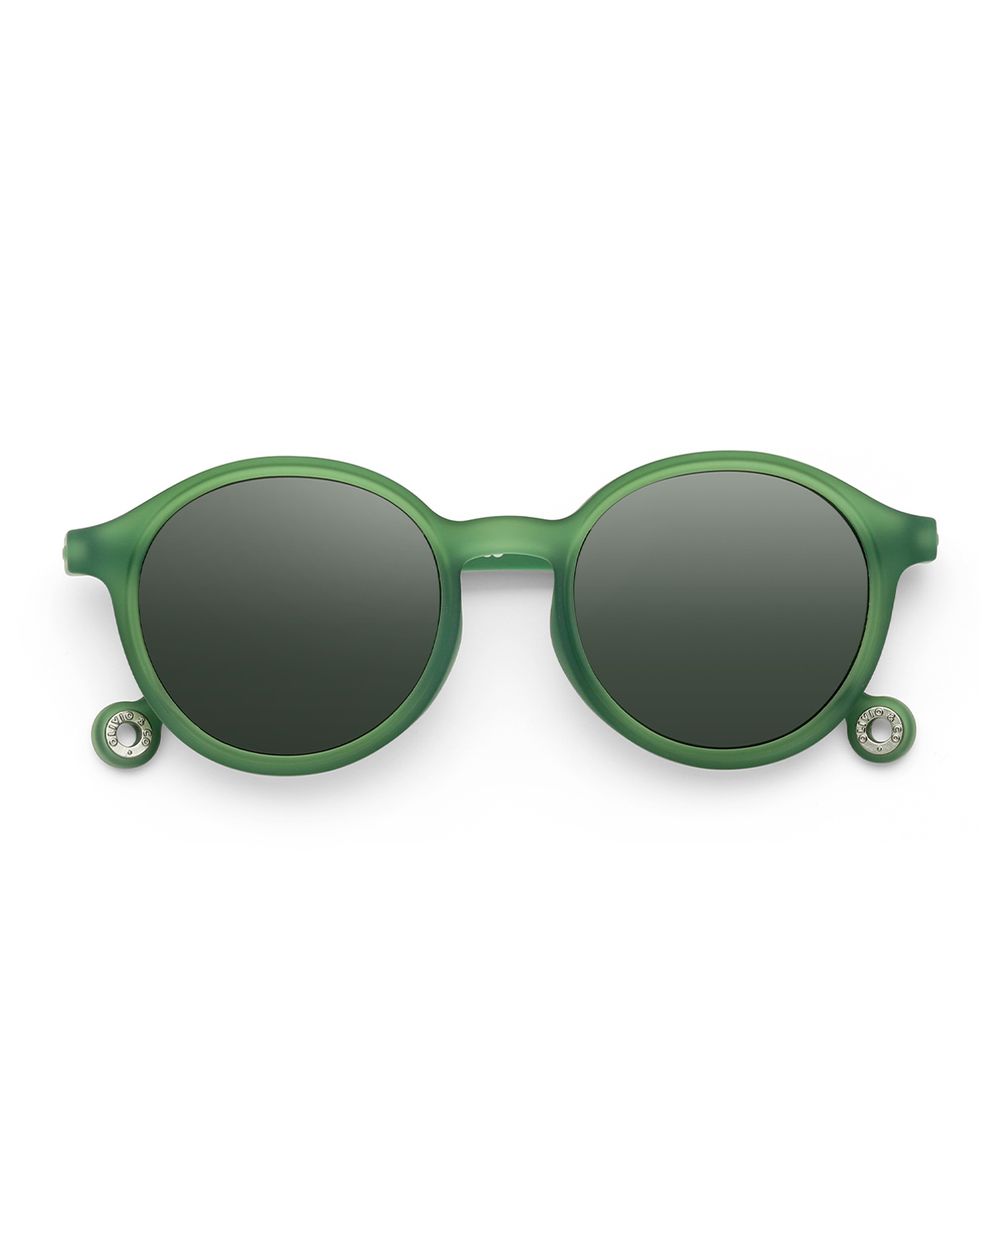 Adult Oval Sunglasses Olive Green with Non-Polarized